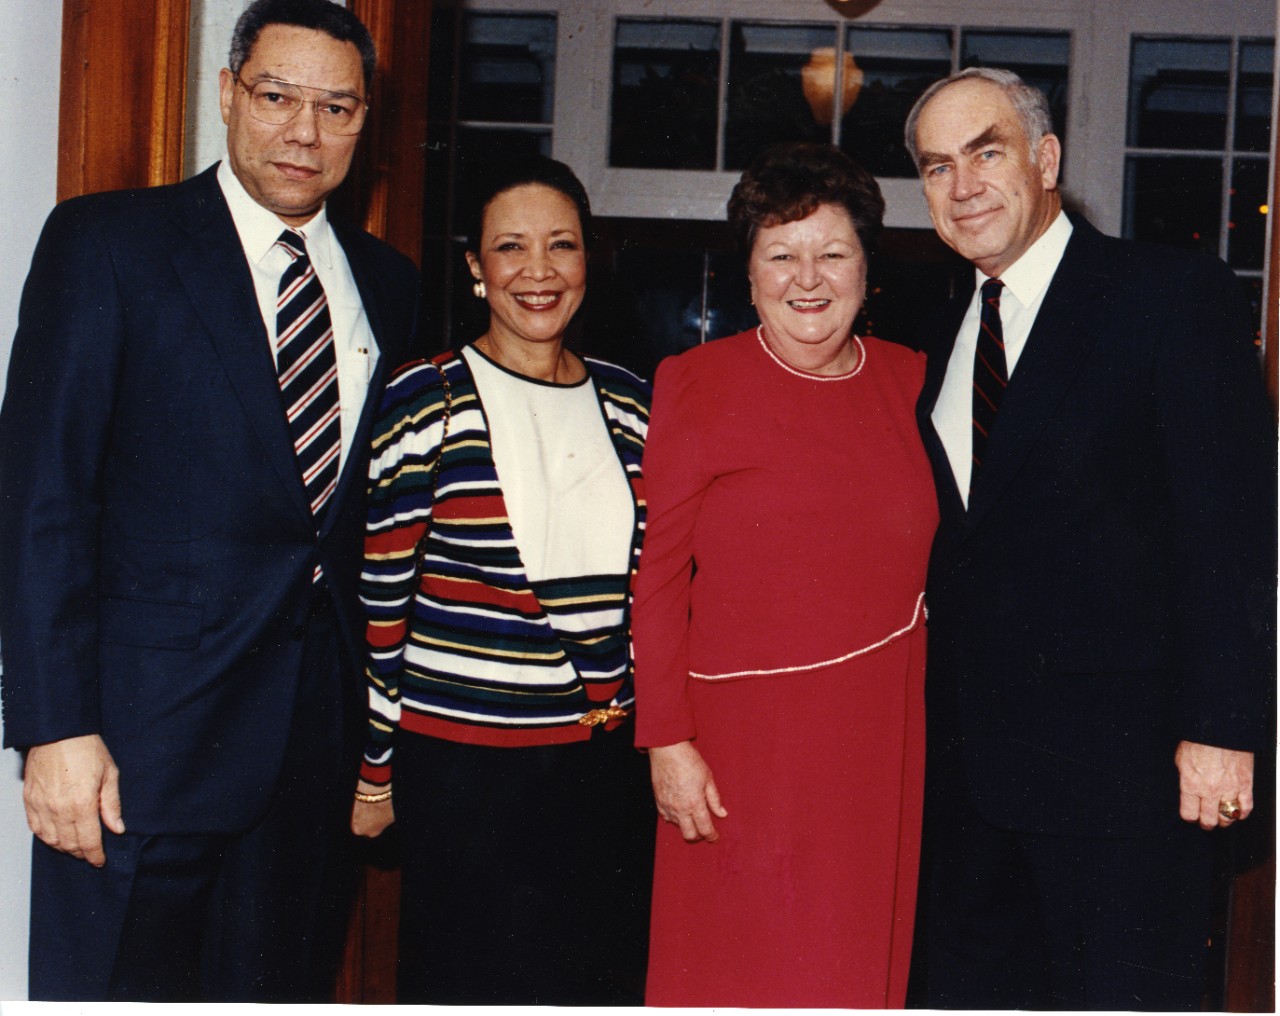 <p>2016.13.02 ADM Frank Kelso, Gen. Colin Powell, and spouses</p><p>&nbsp;</p><div style="left: -10000px; top: 0px; width: 9000px; height: 16px; overflow: hidden; position: absolute;"><div>&nbsp;</div></div>